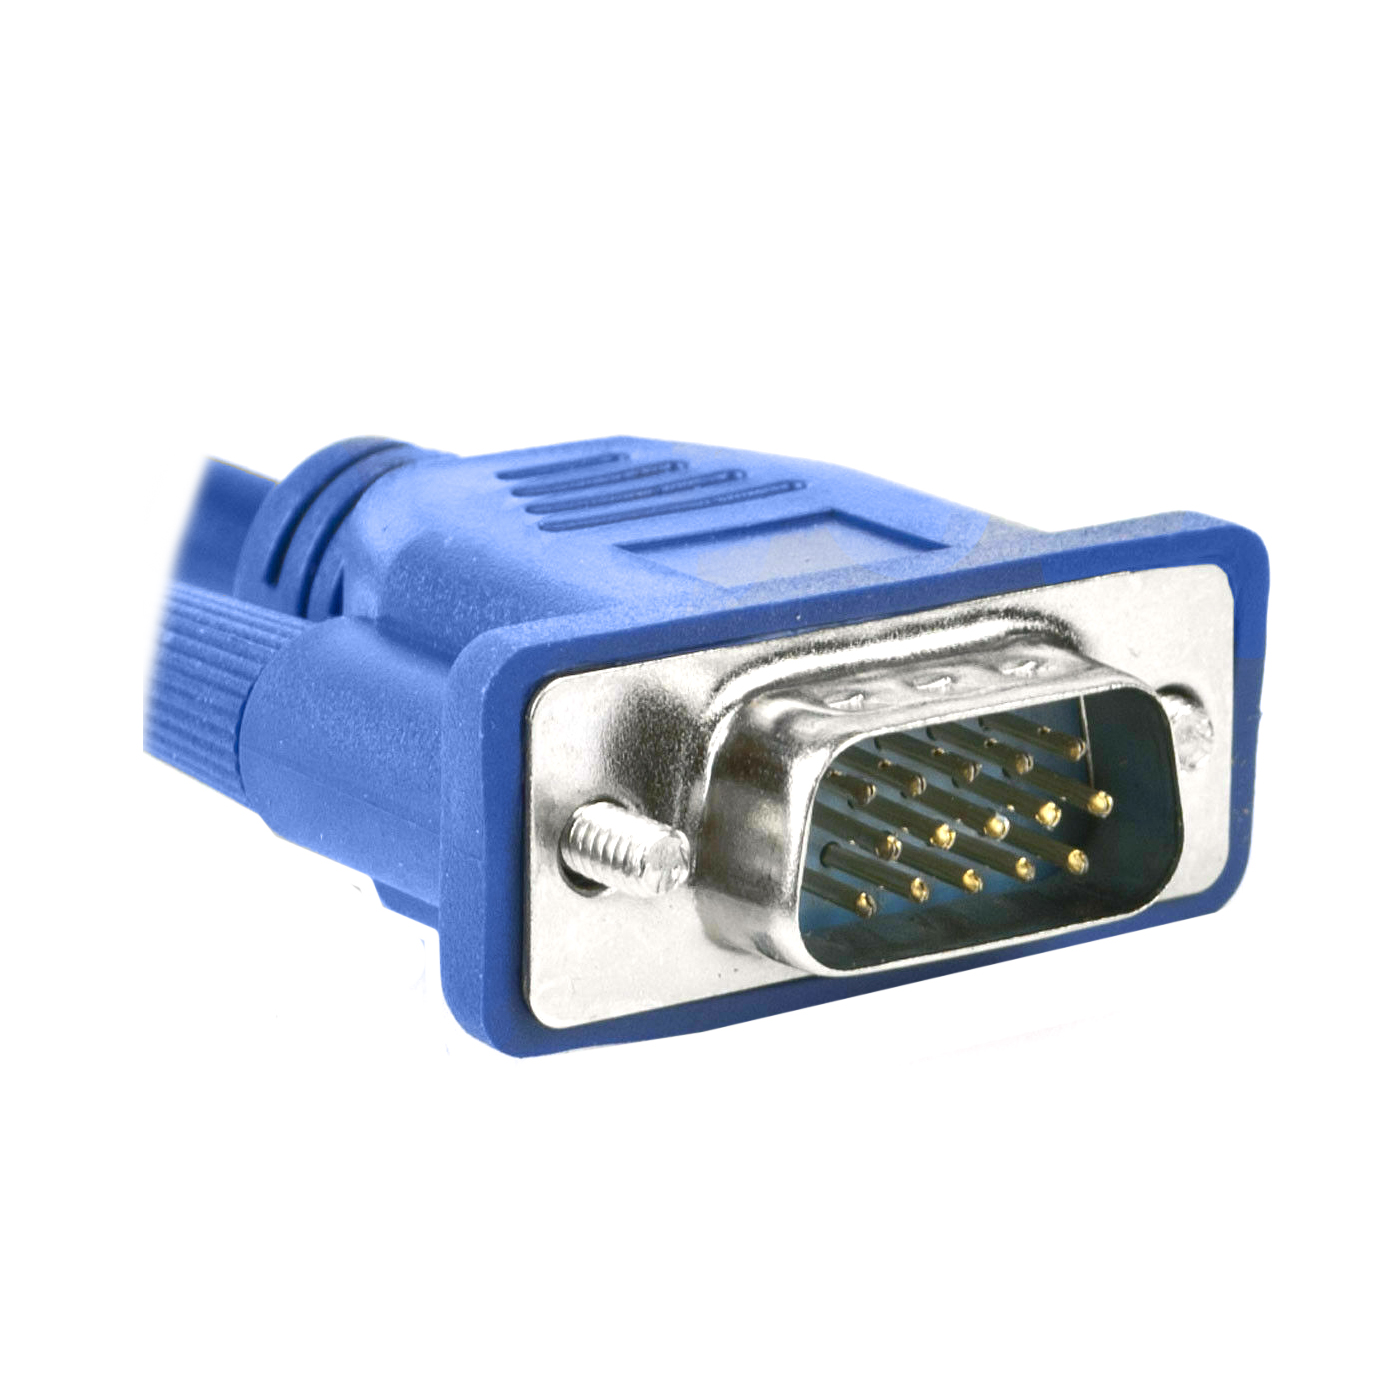 Analog Video Signal Output 3m Normal Quality VGA 15Pin Male to VGA 15Pin Female Cable for CRT Monitor. 